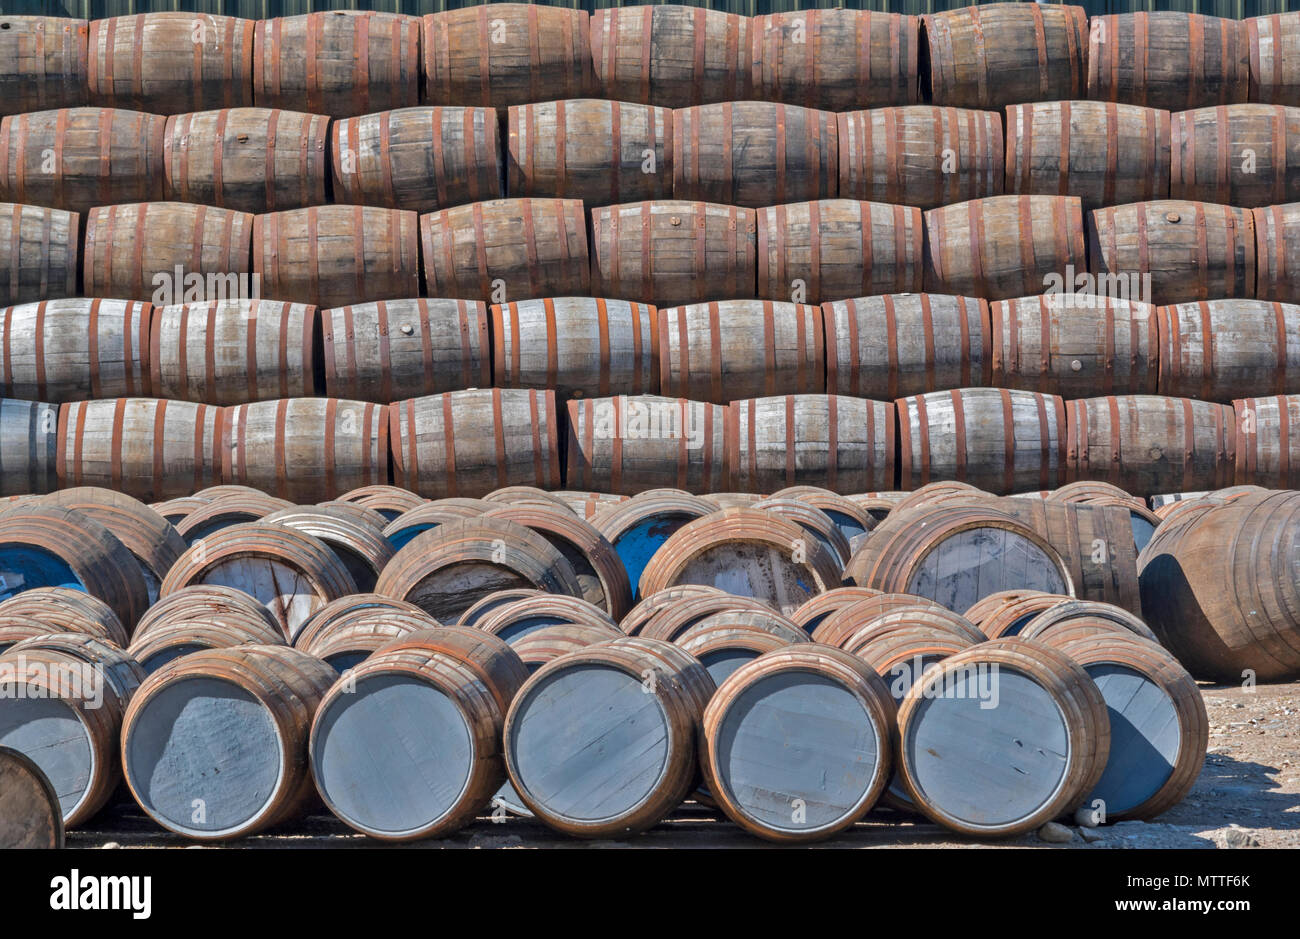 MALT WHISKY BARRELS OR CASKS STACKED ROW UPON ROW AT TAMDHU CLOSE TO THE RIVER SPEY  SPEYSIDE SCOTLAND Stock Photo